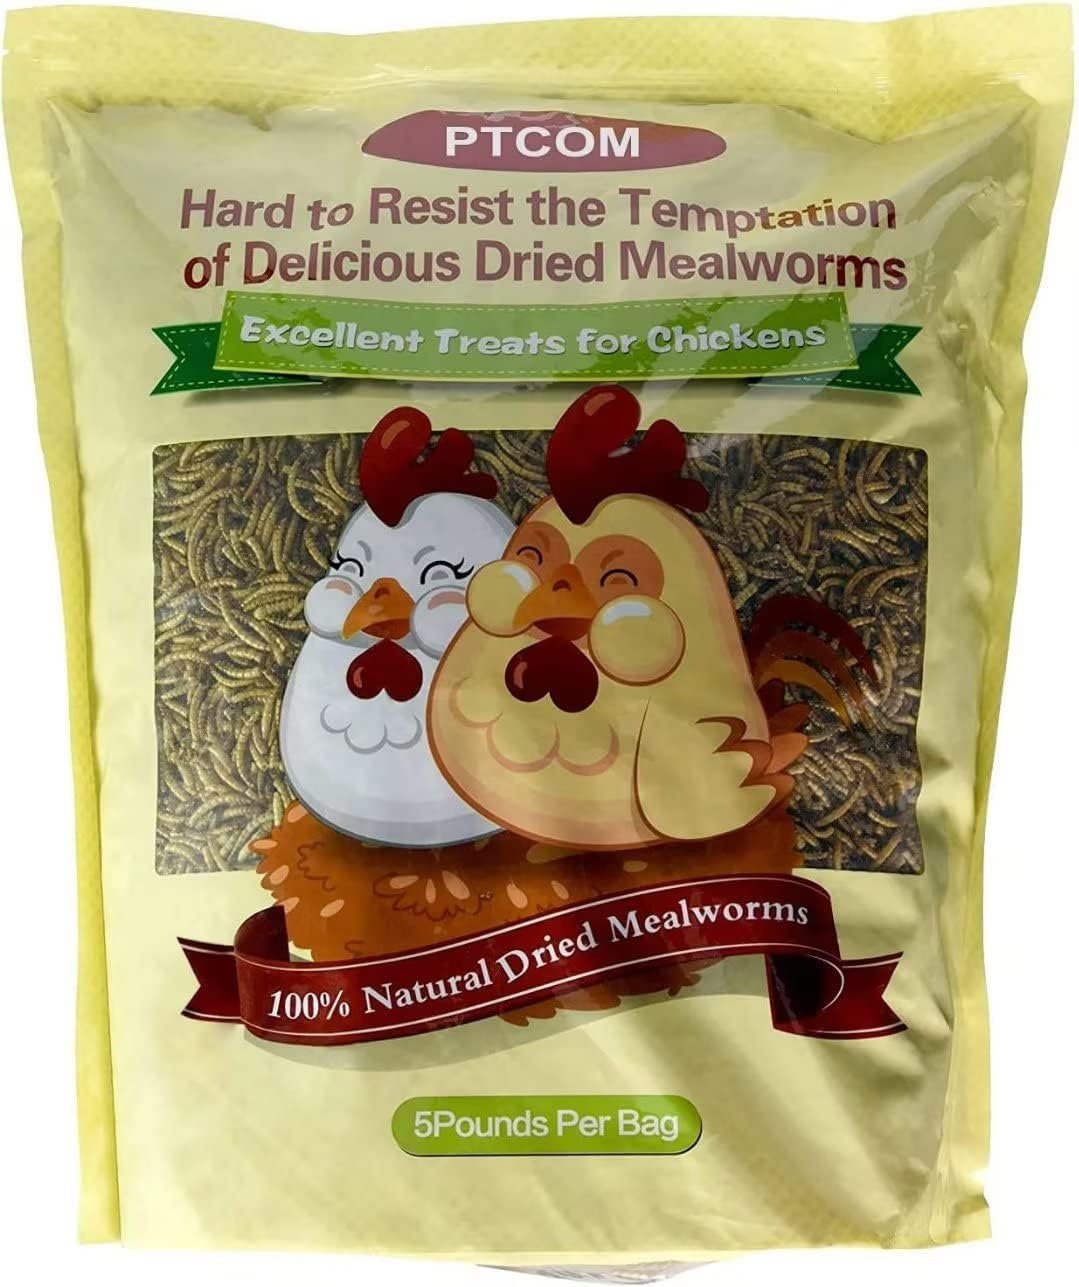 Hatortempt 5lbs Non-GMO Dried Mealworms - Premium Organic Chicken Feed, Nutritious High Protein Meal Worms- Food and Treats for Laying Hens, Wild Birds, Ducks, Reptiles, Fish, Hedgehogs, Turtles